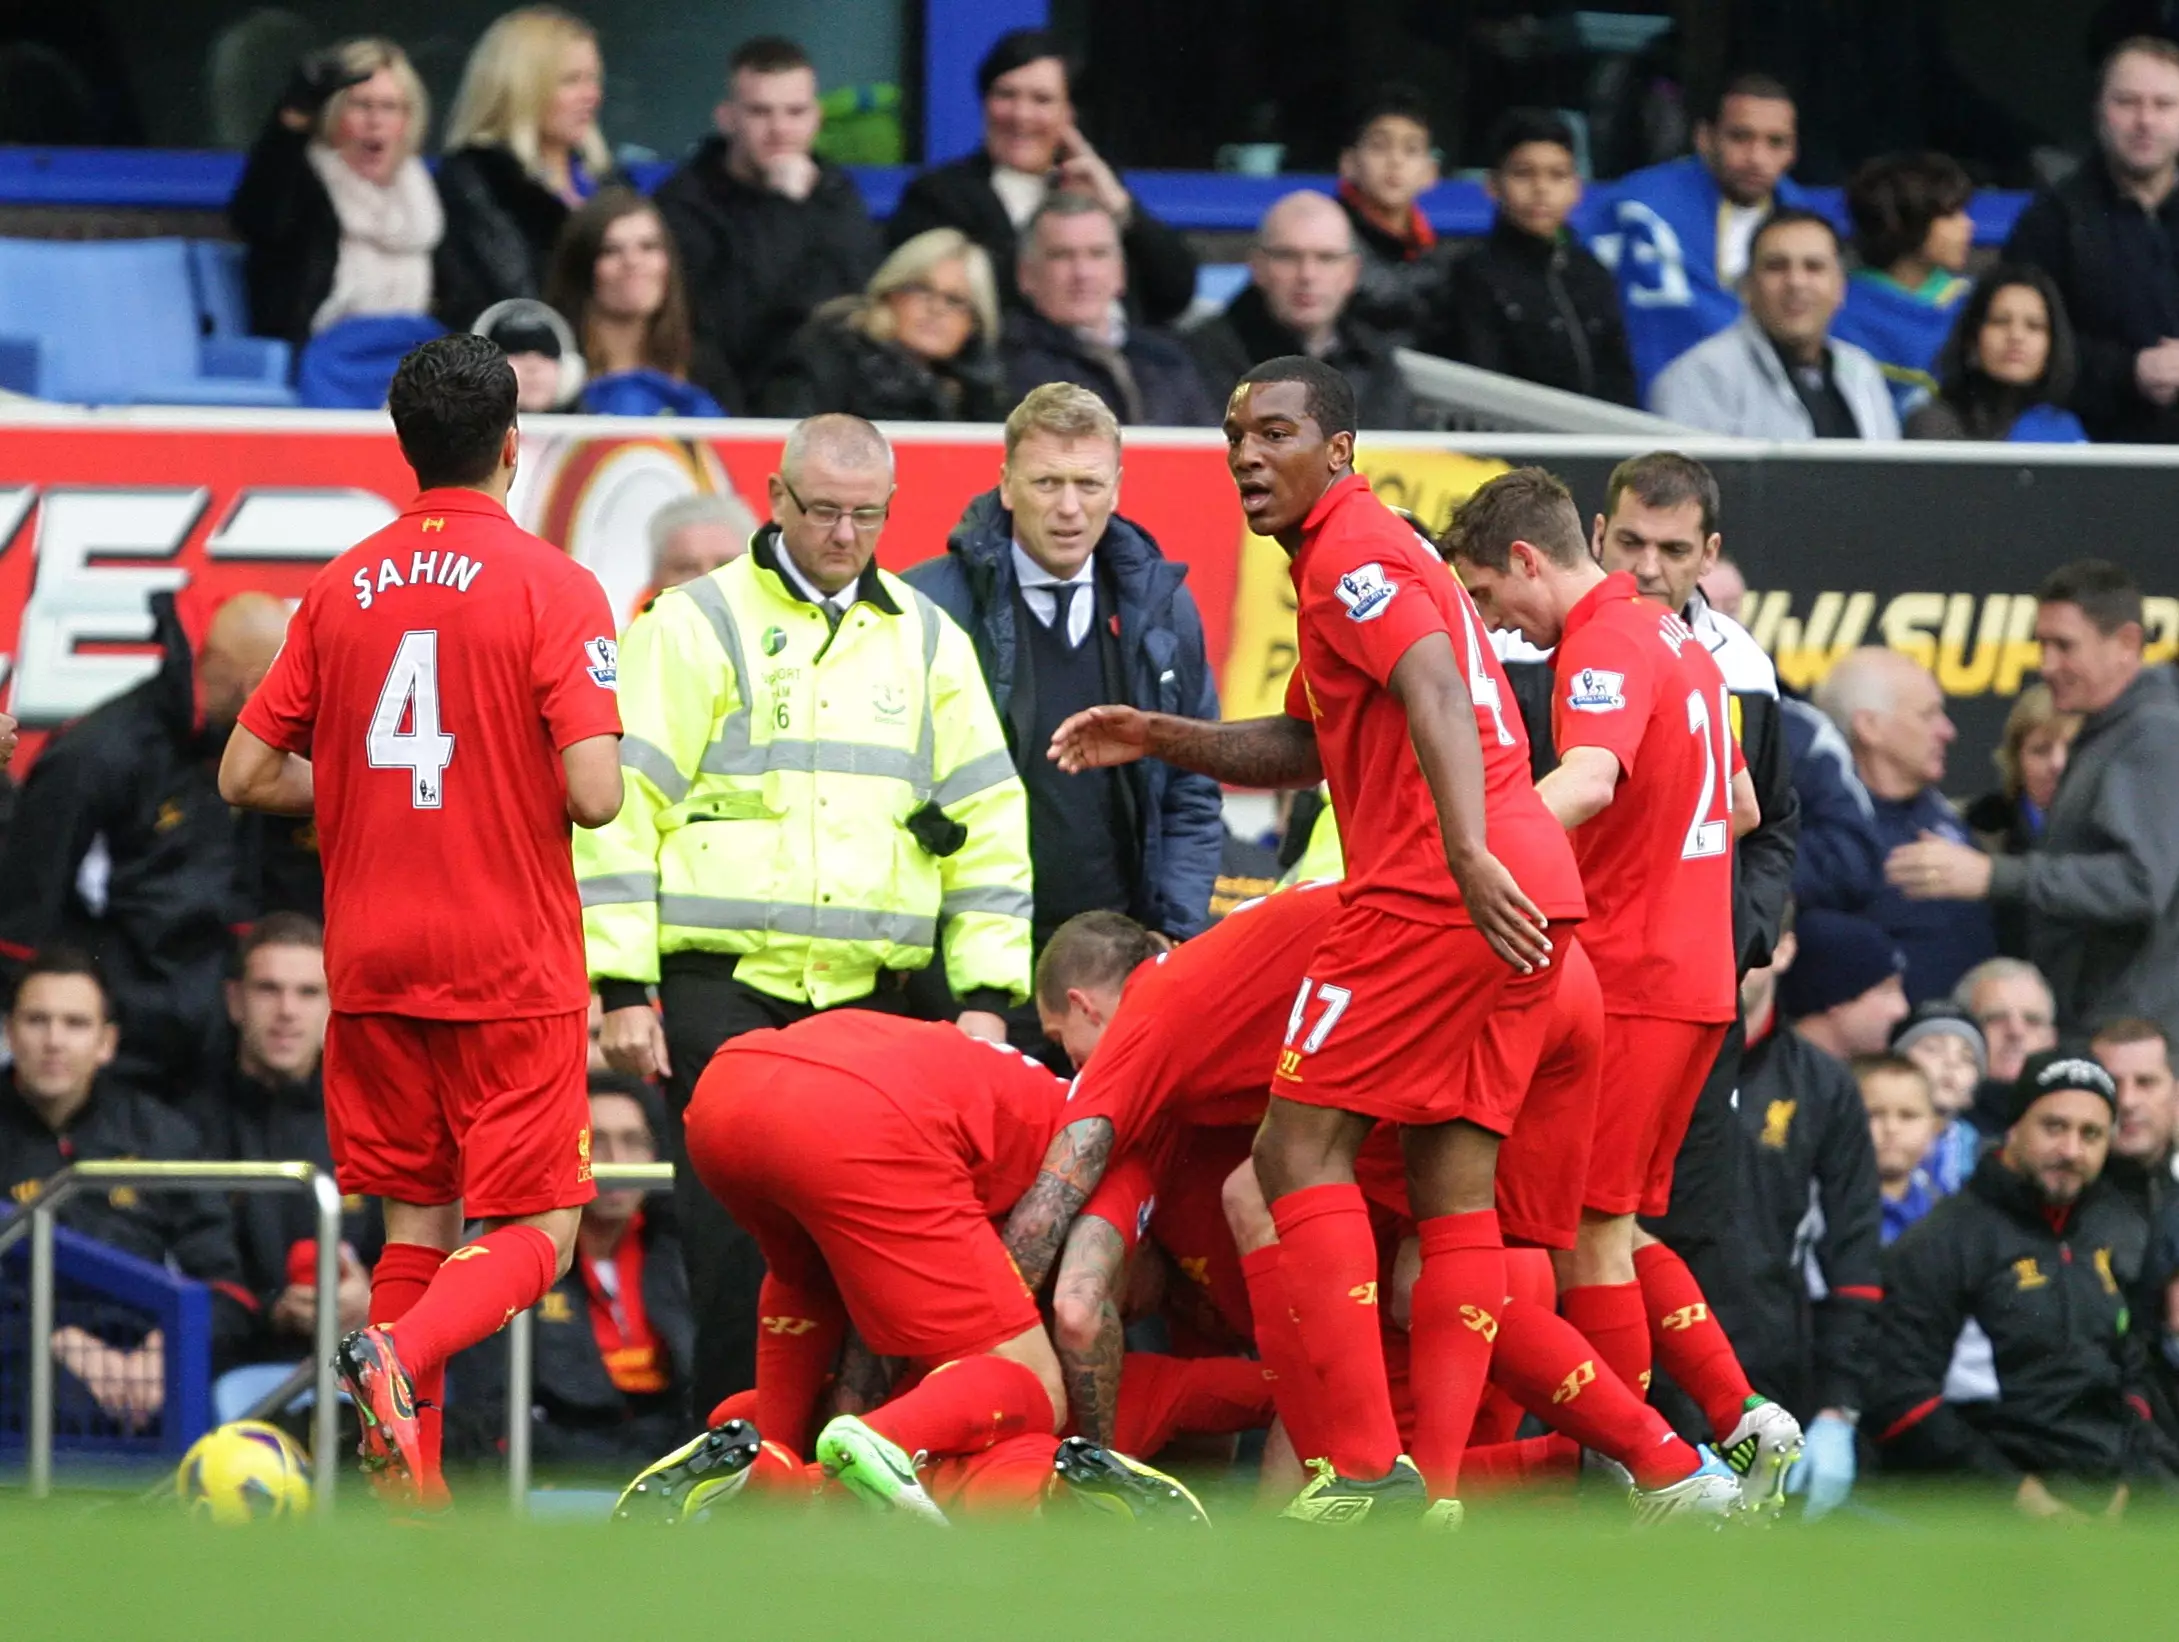 Luis Suarez takes a dive at David Moyes after scoring in the Merseyside derby